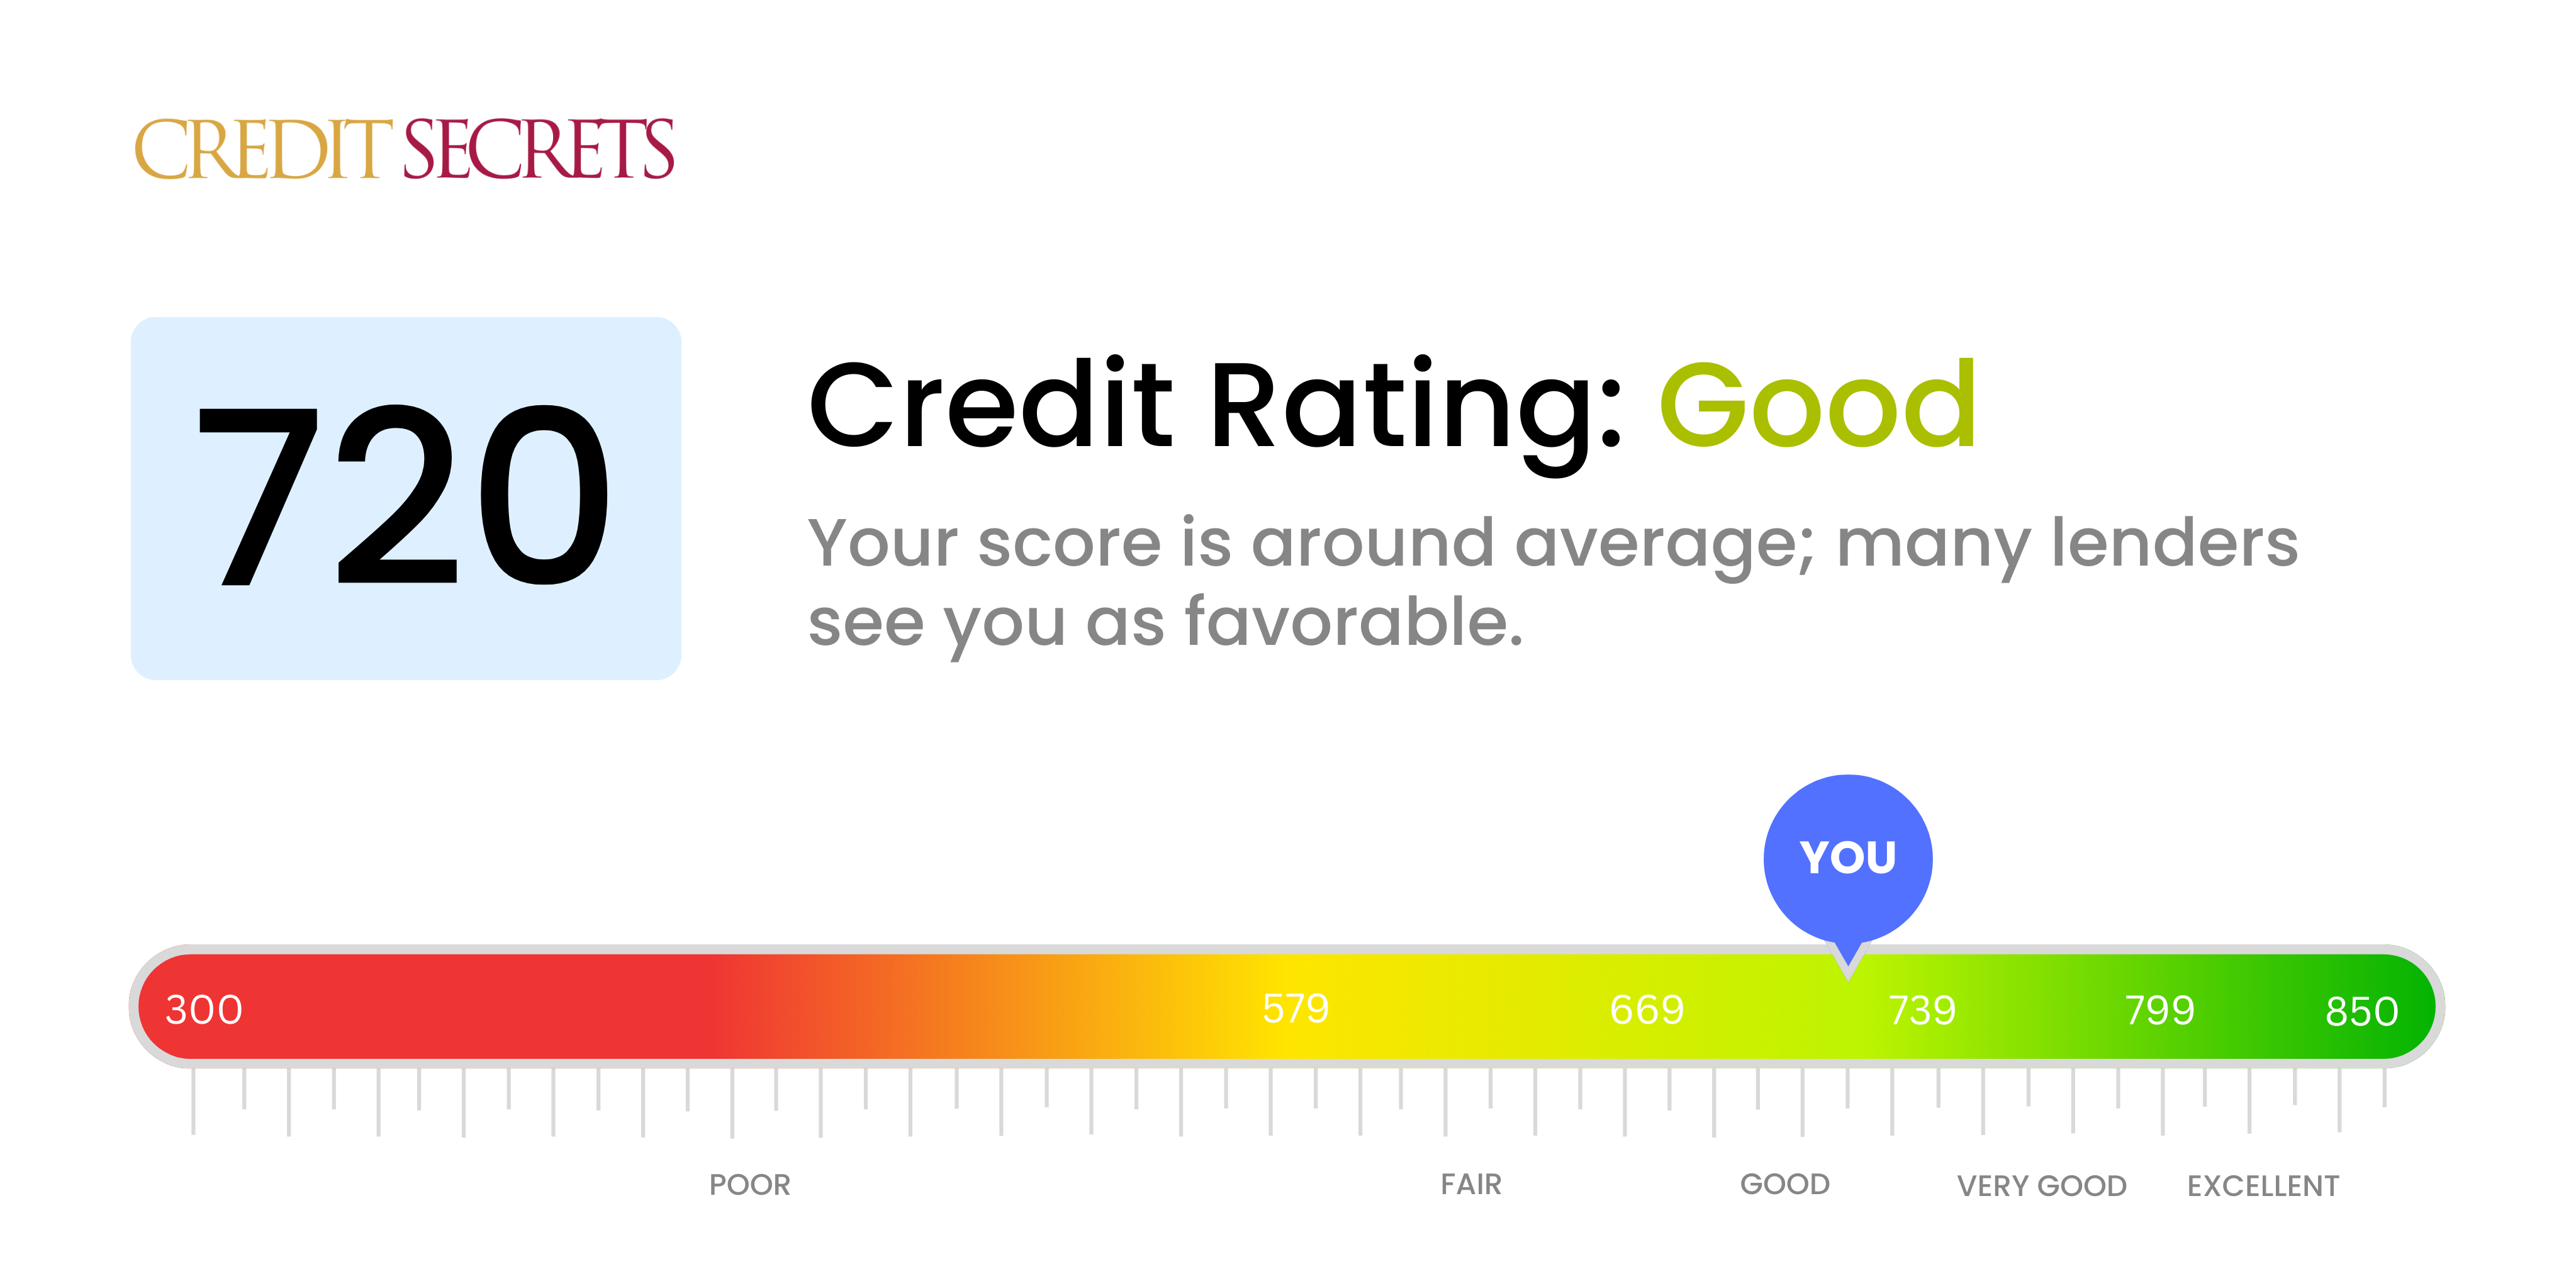 Is 720 a good credit score?